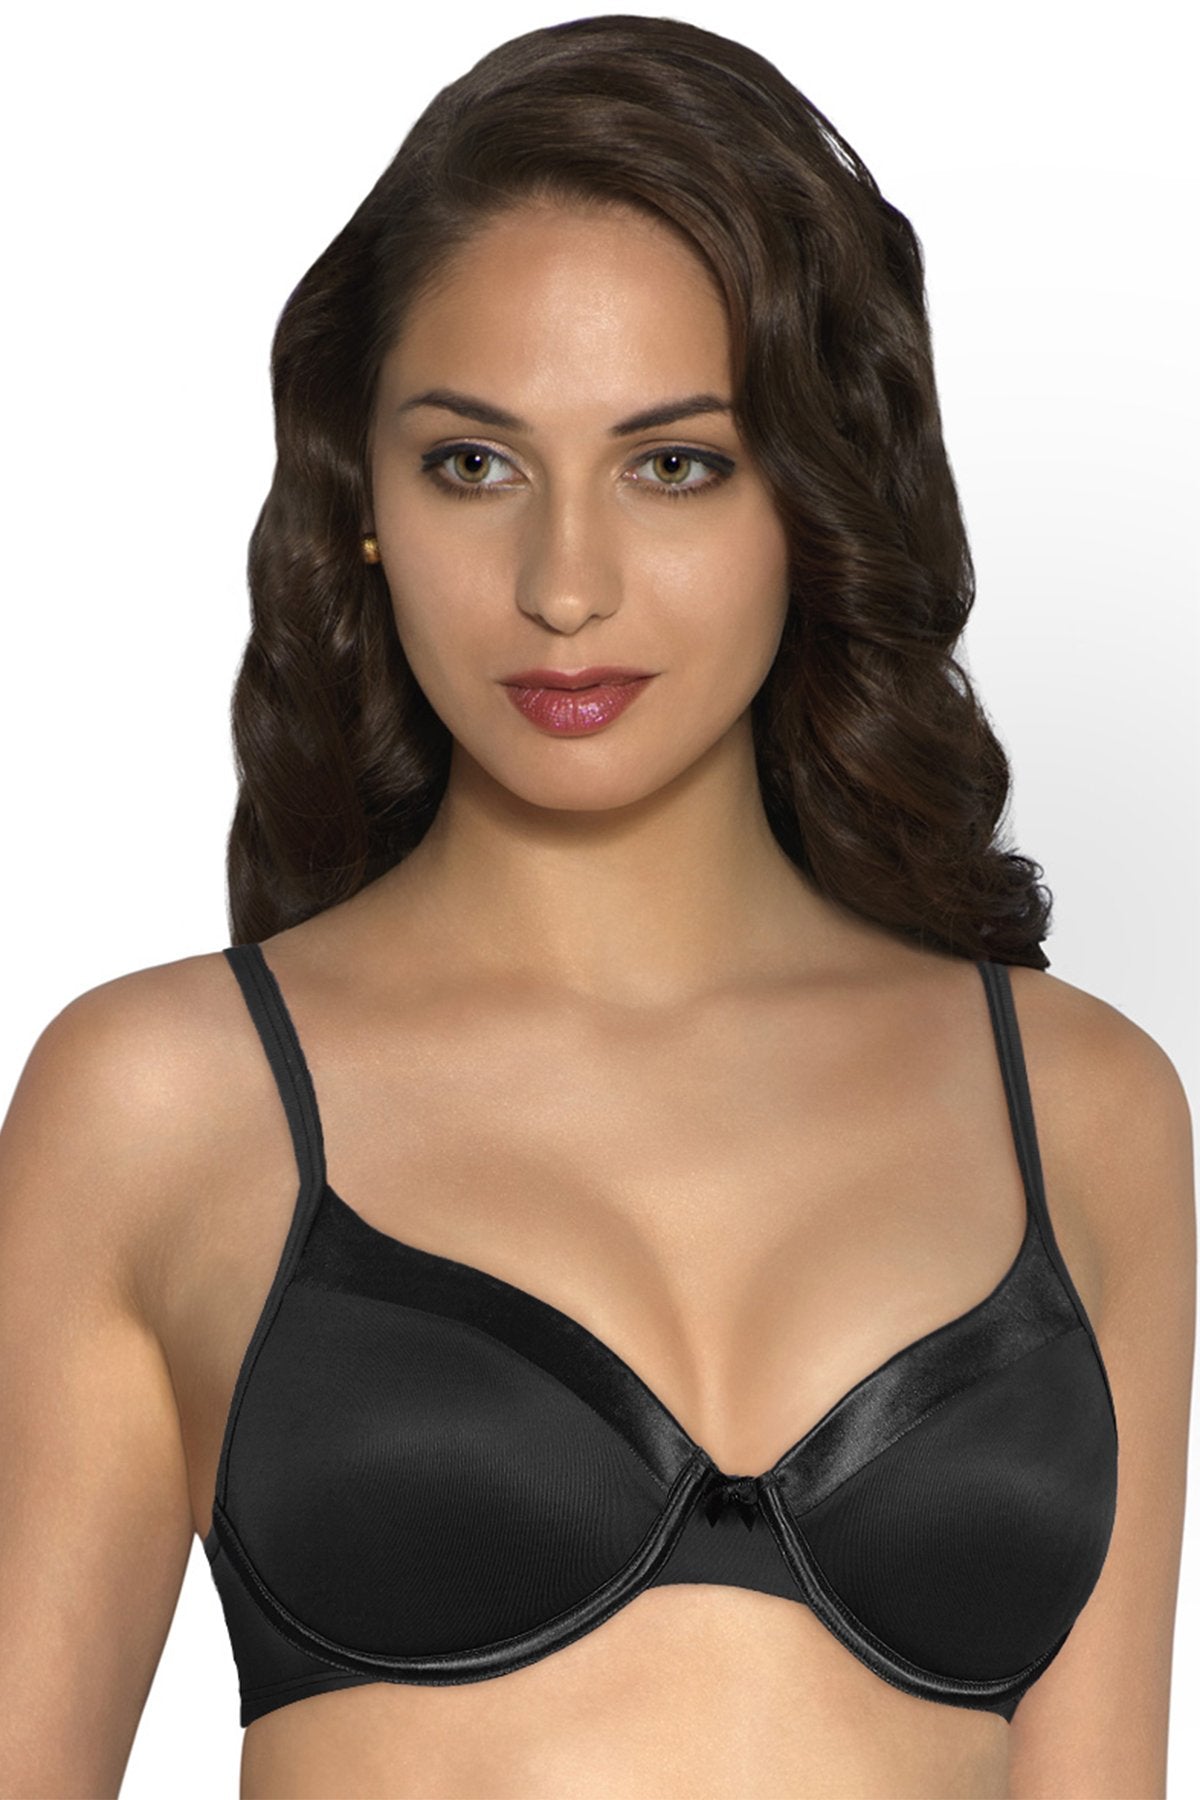 Padded Bra - Buy Padded Bras Online By Price, Size & Color – tagged Black  – Page 2